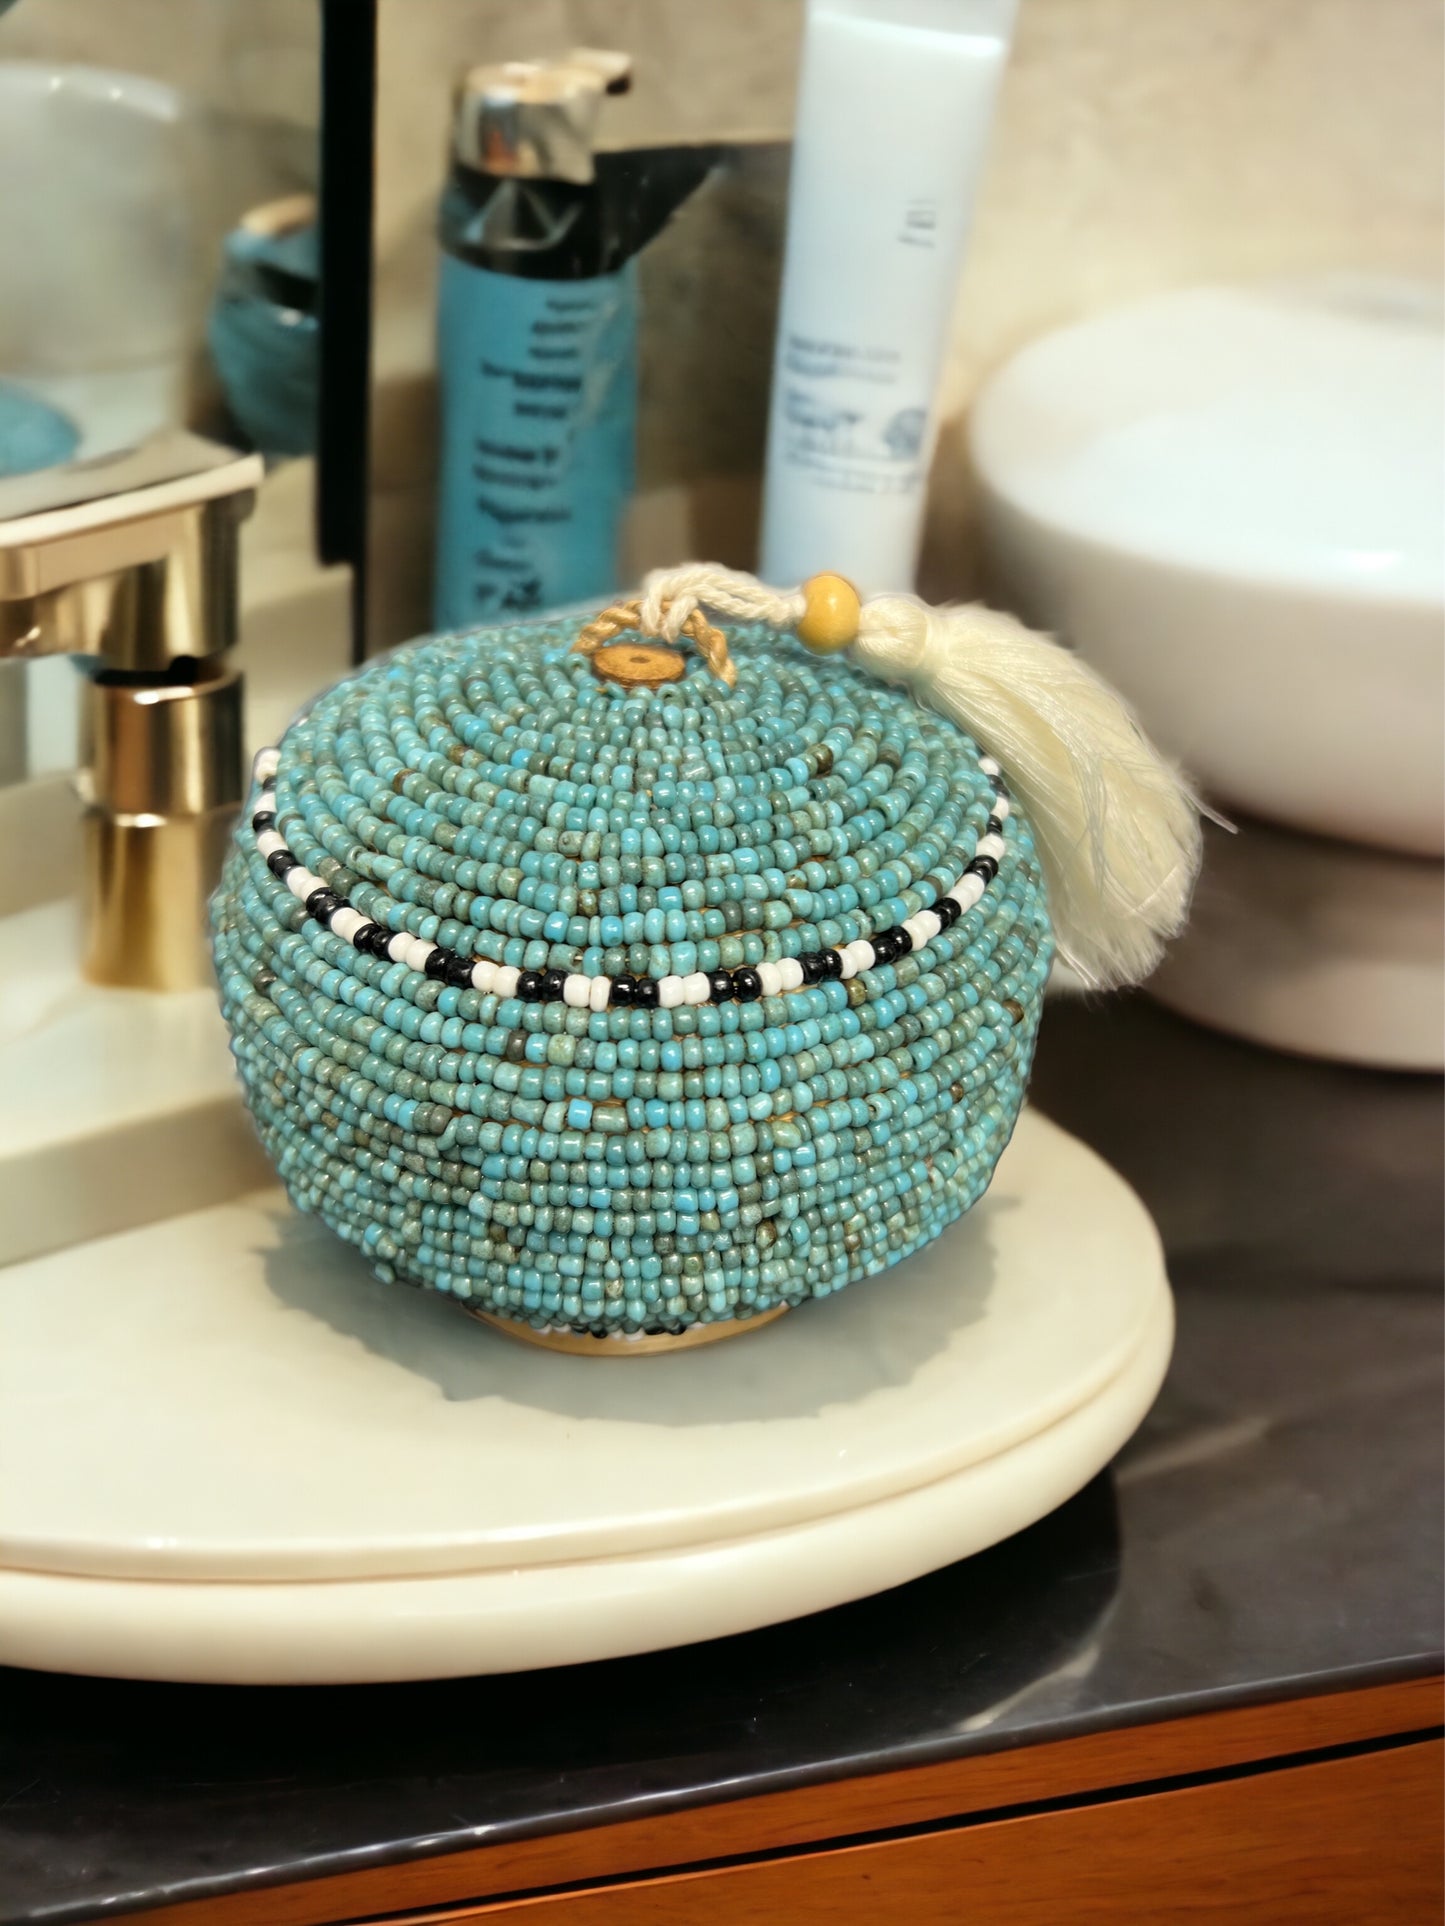 Elevate your jewelry storage with our Beaded Jewelry Box Round. With its handcrafted beauty and practical design, it's the perfect accessory for organizing and displaying your most treasured pieces.